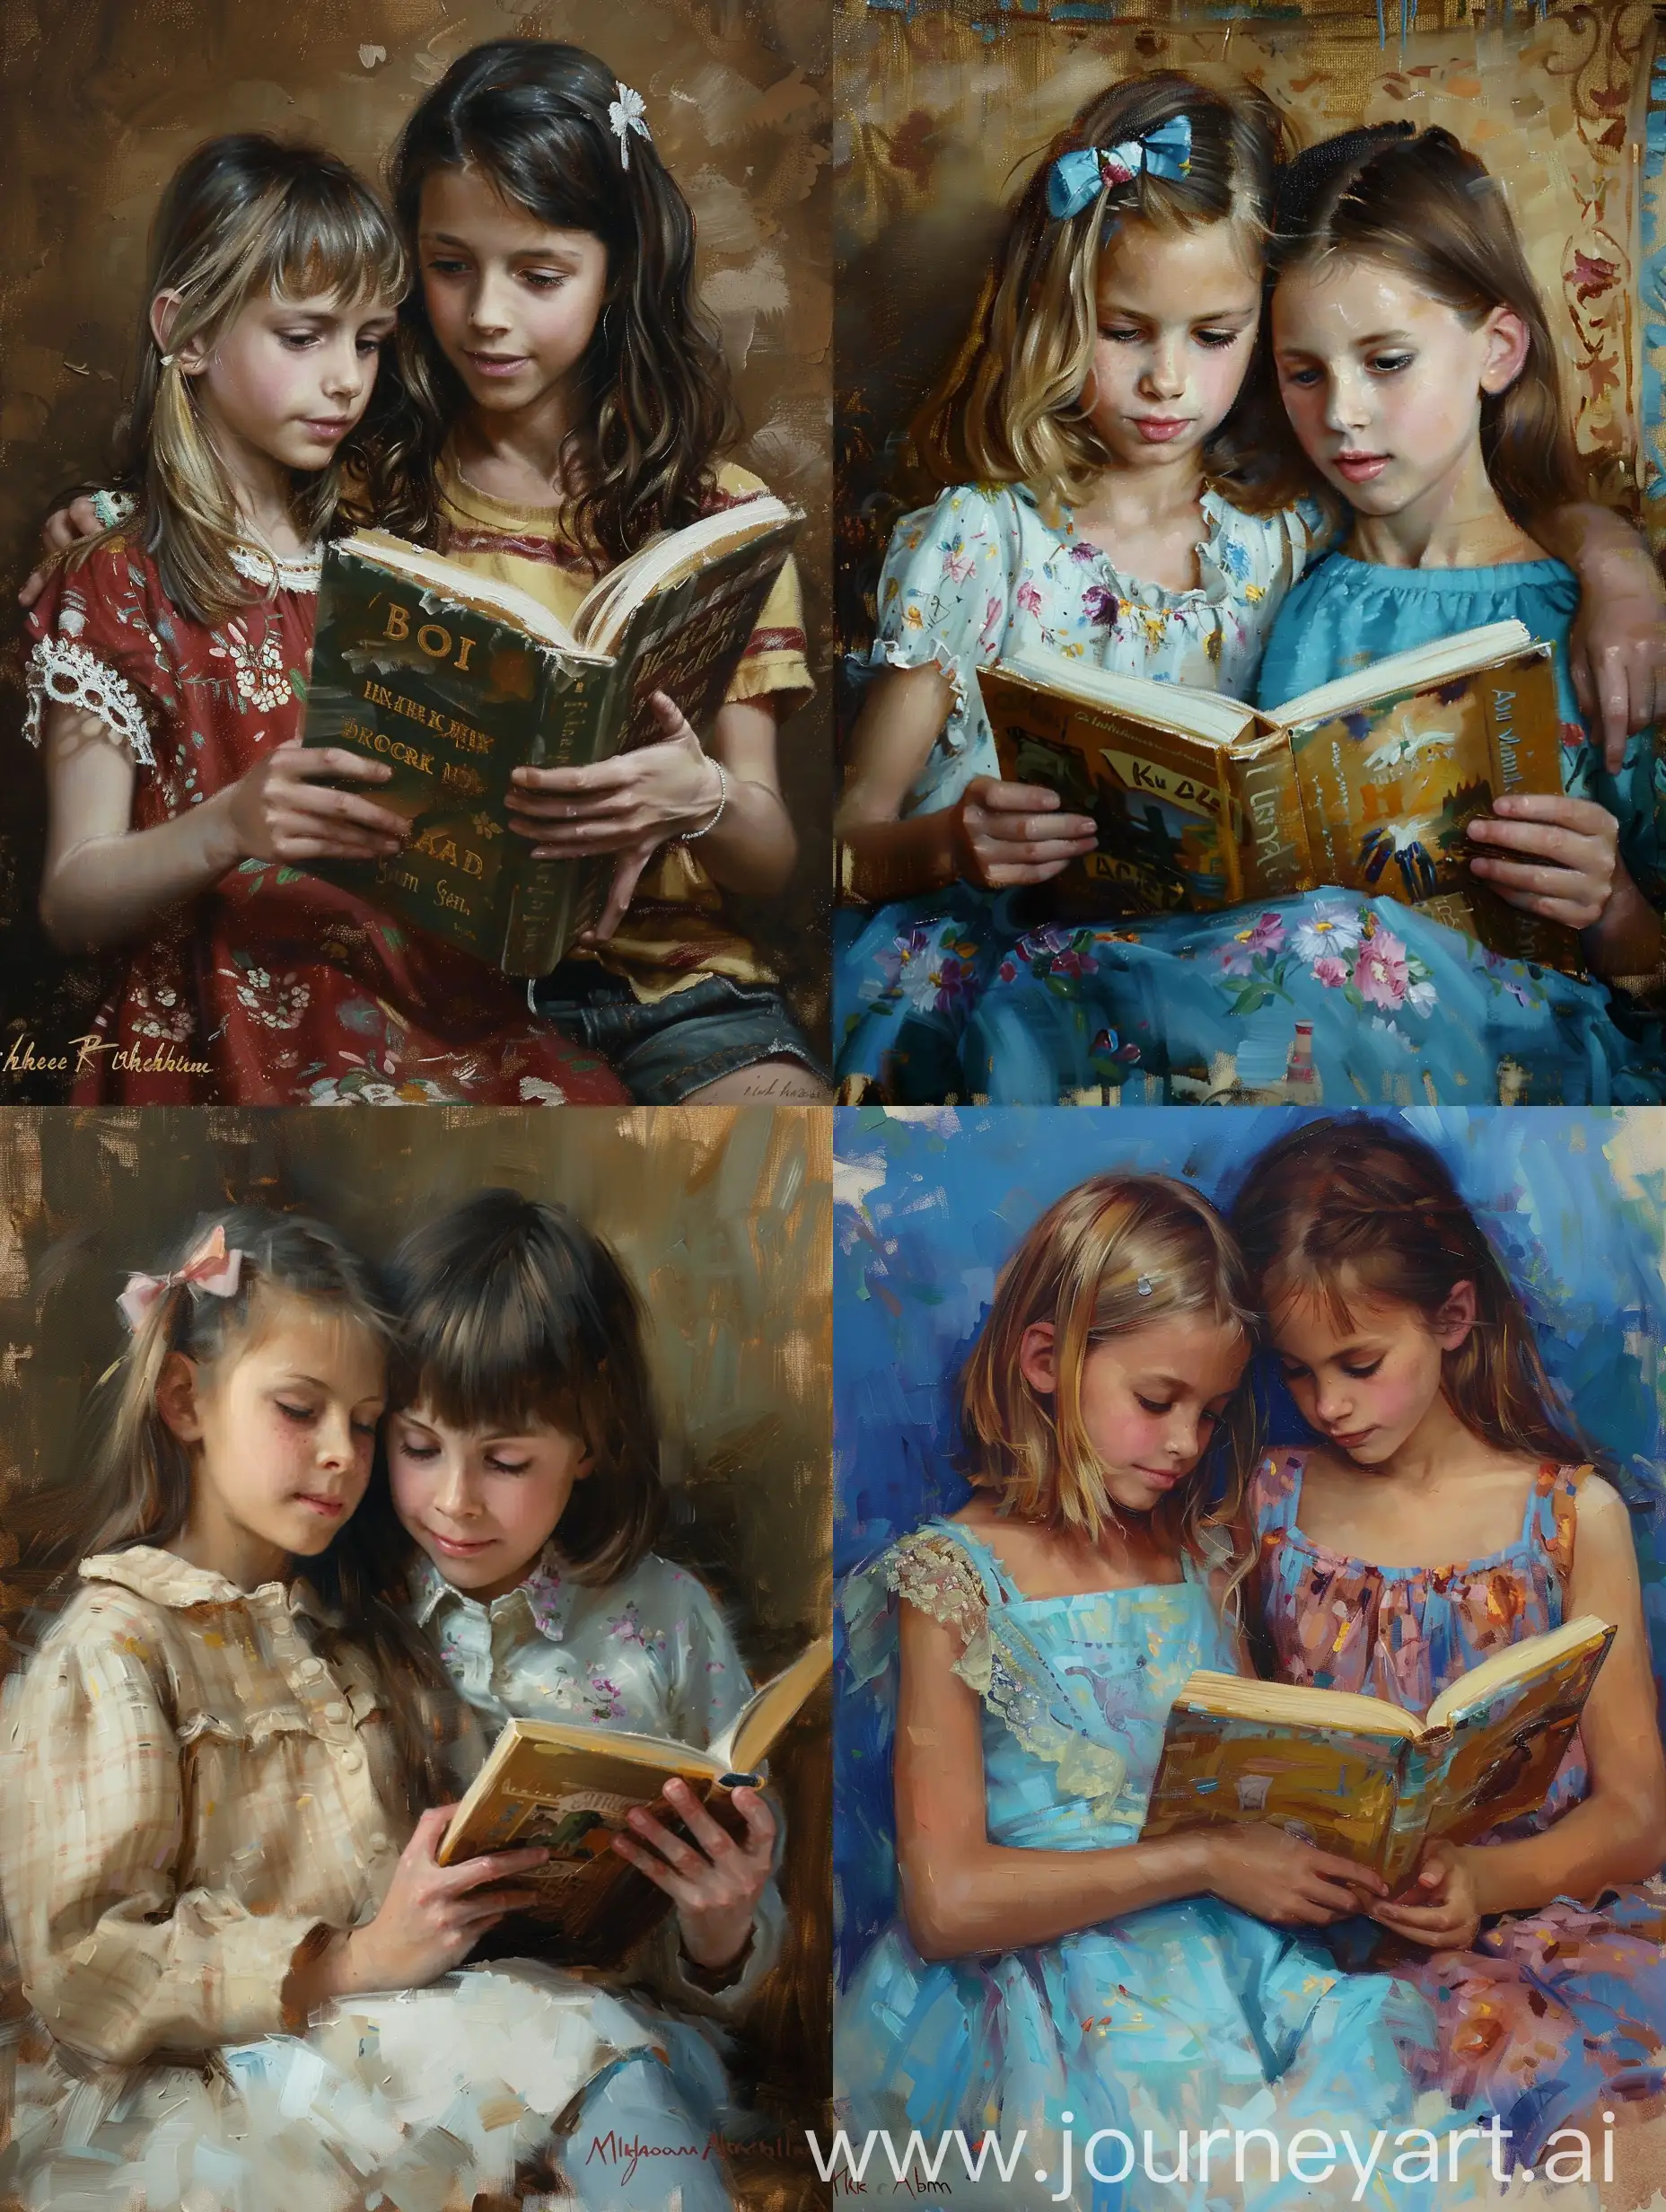 a painting of two girls reading a book, by Winona Nelson, beautiful painting of friends, by Kathleen Browne, fine art portrait painting, mark brooks and brad kunkle, award-winning oil painting, nick alm, award - winning painting, award-winning painting, beautiful gemini twins portrait, emotional oil painting, casey baugh and james jean, by Maggie Hamilton